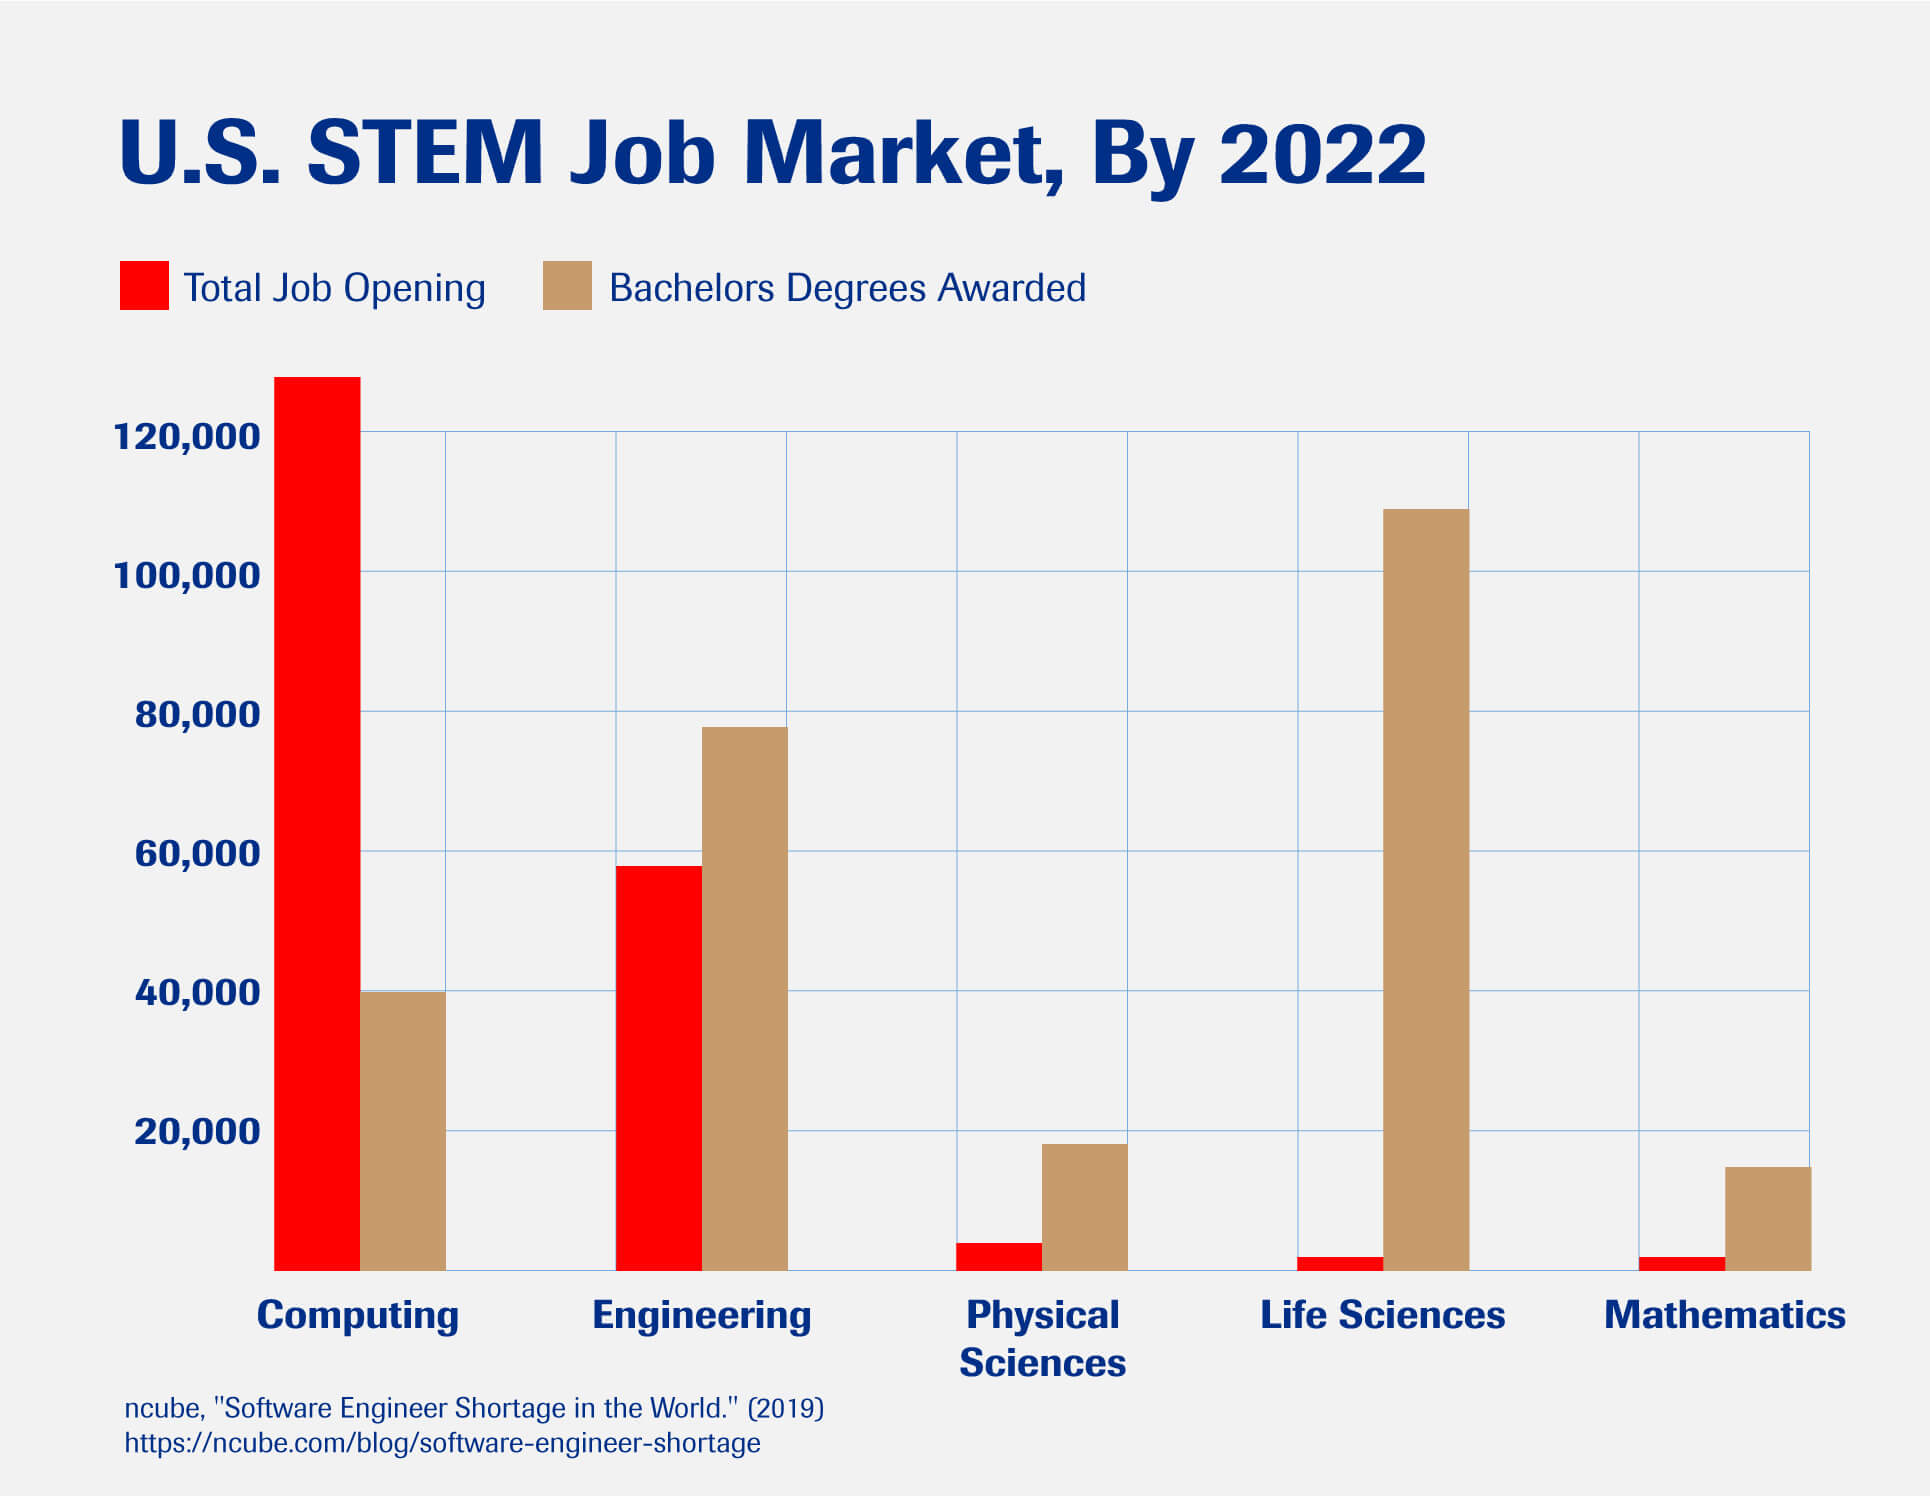 A chart showing the number of STEM job openings in the U.S. market compared to degrees awarded